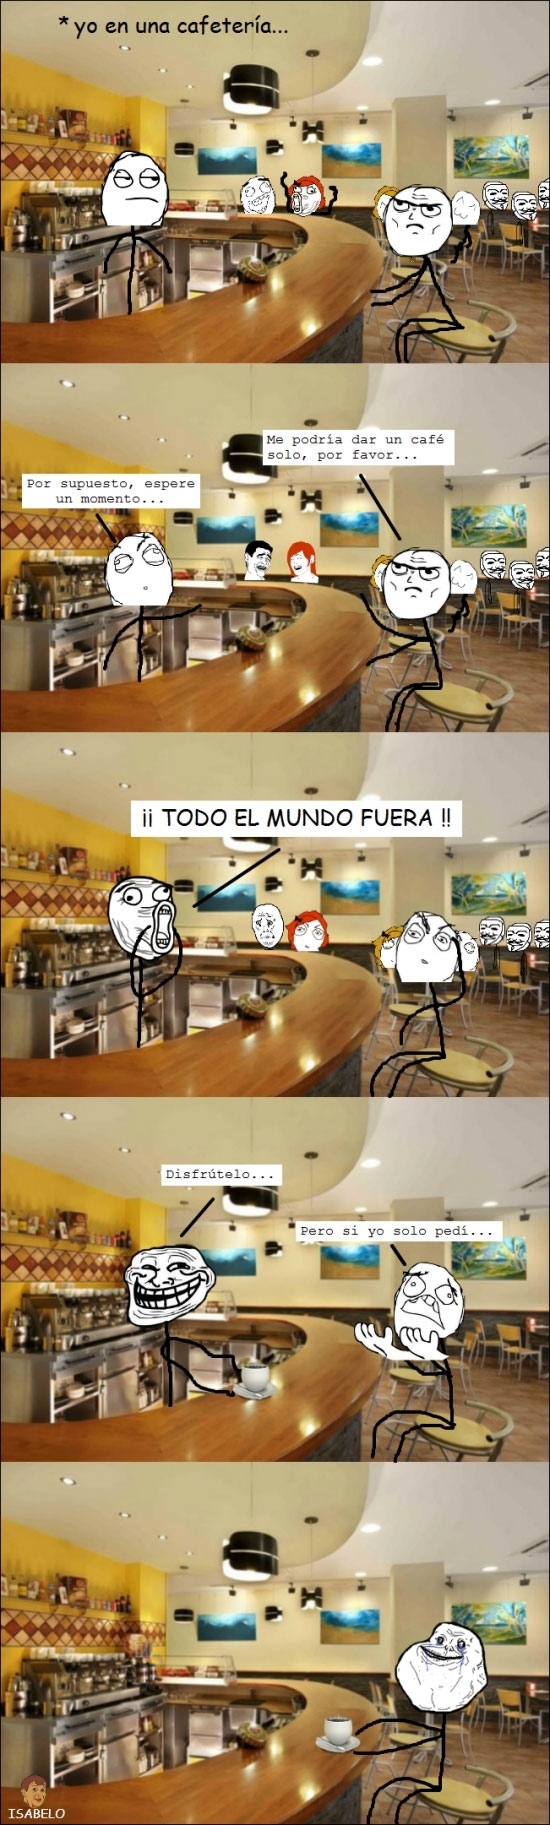 Cafe,Cafeteria,determined,forever alone,happy,LOL,okay,solo,trollface